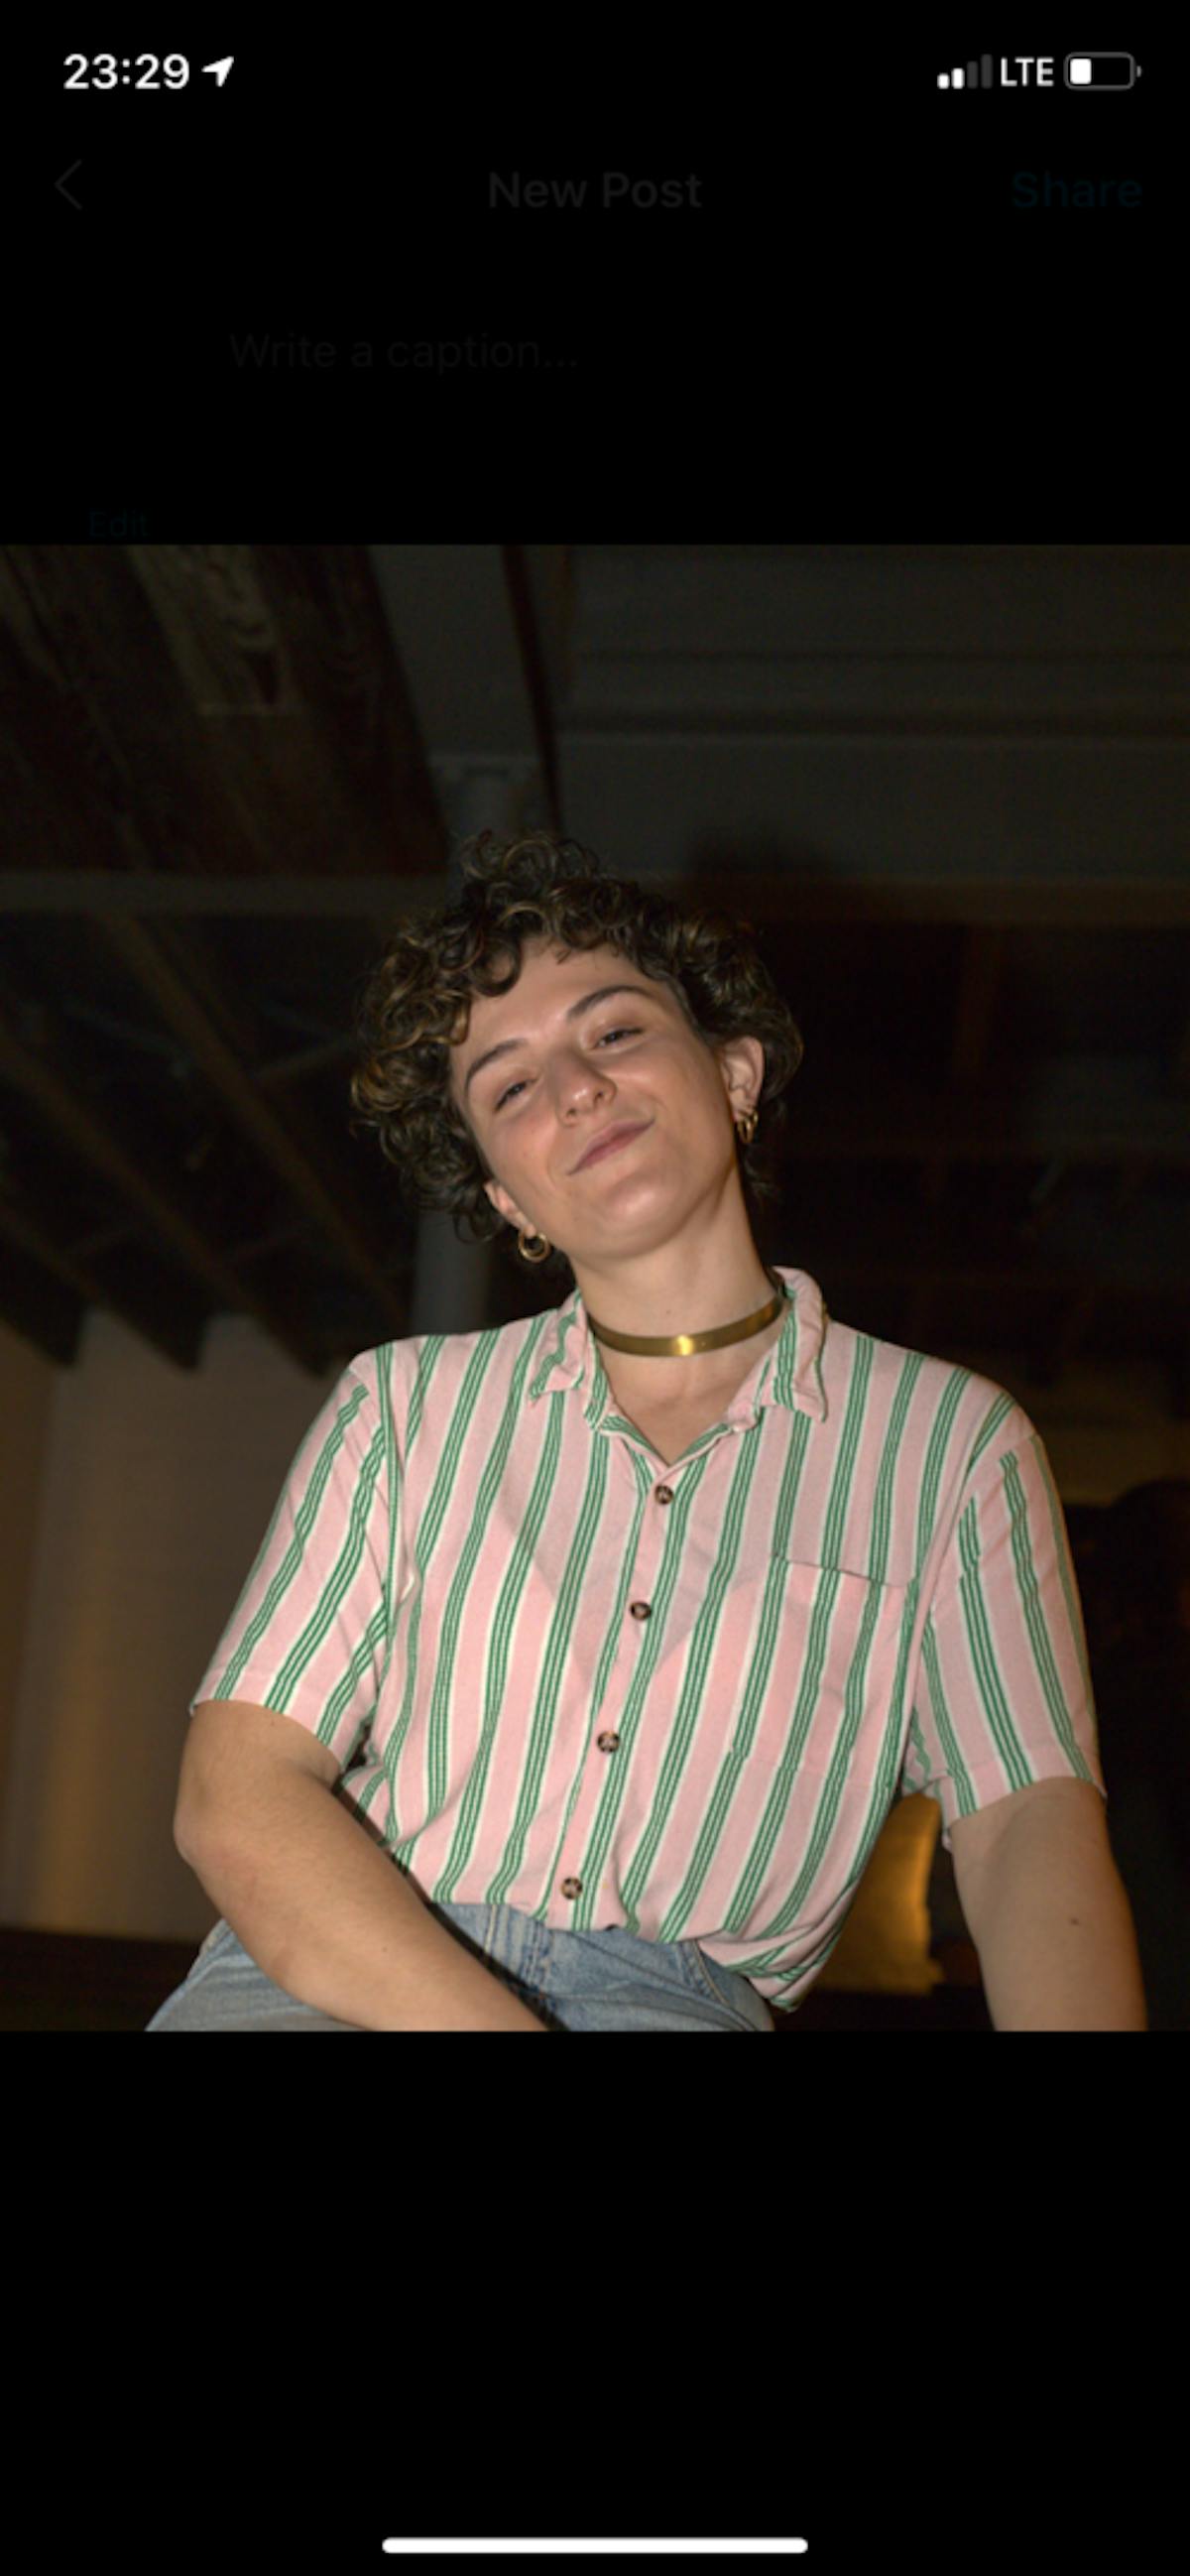 a person in a striped shirt